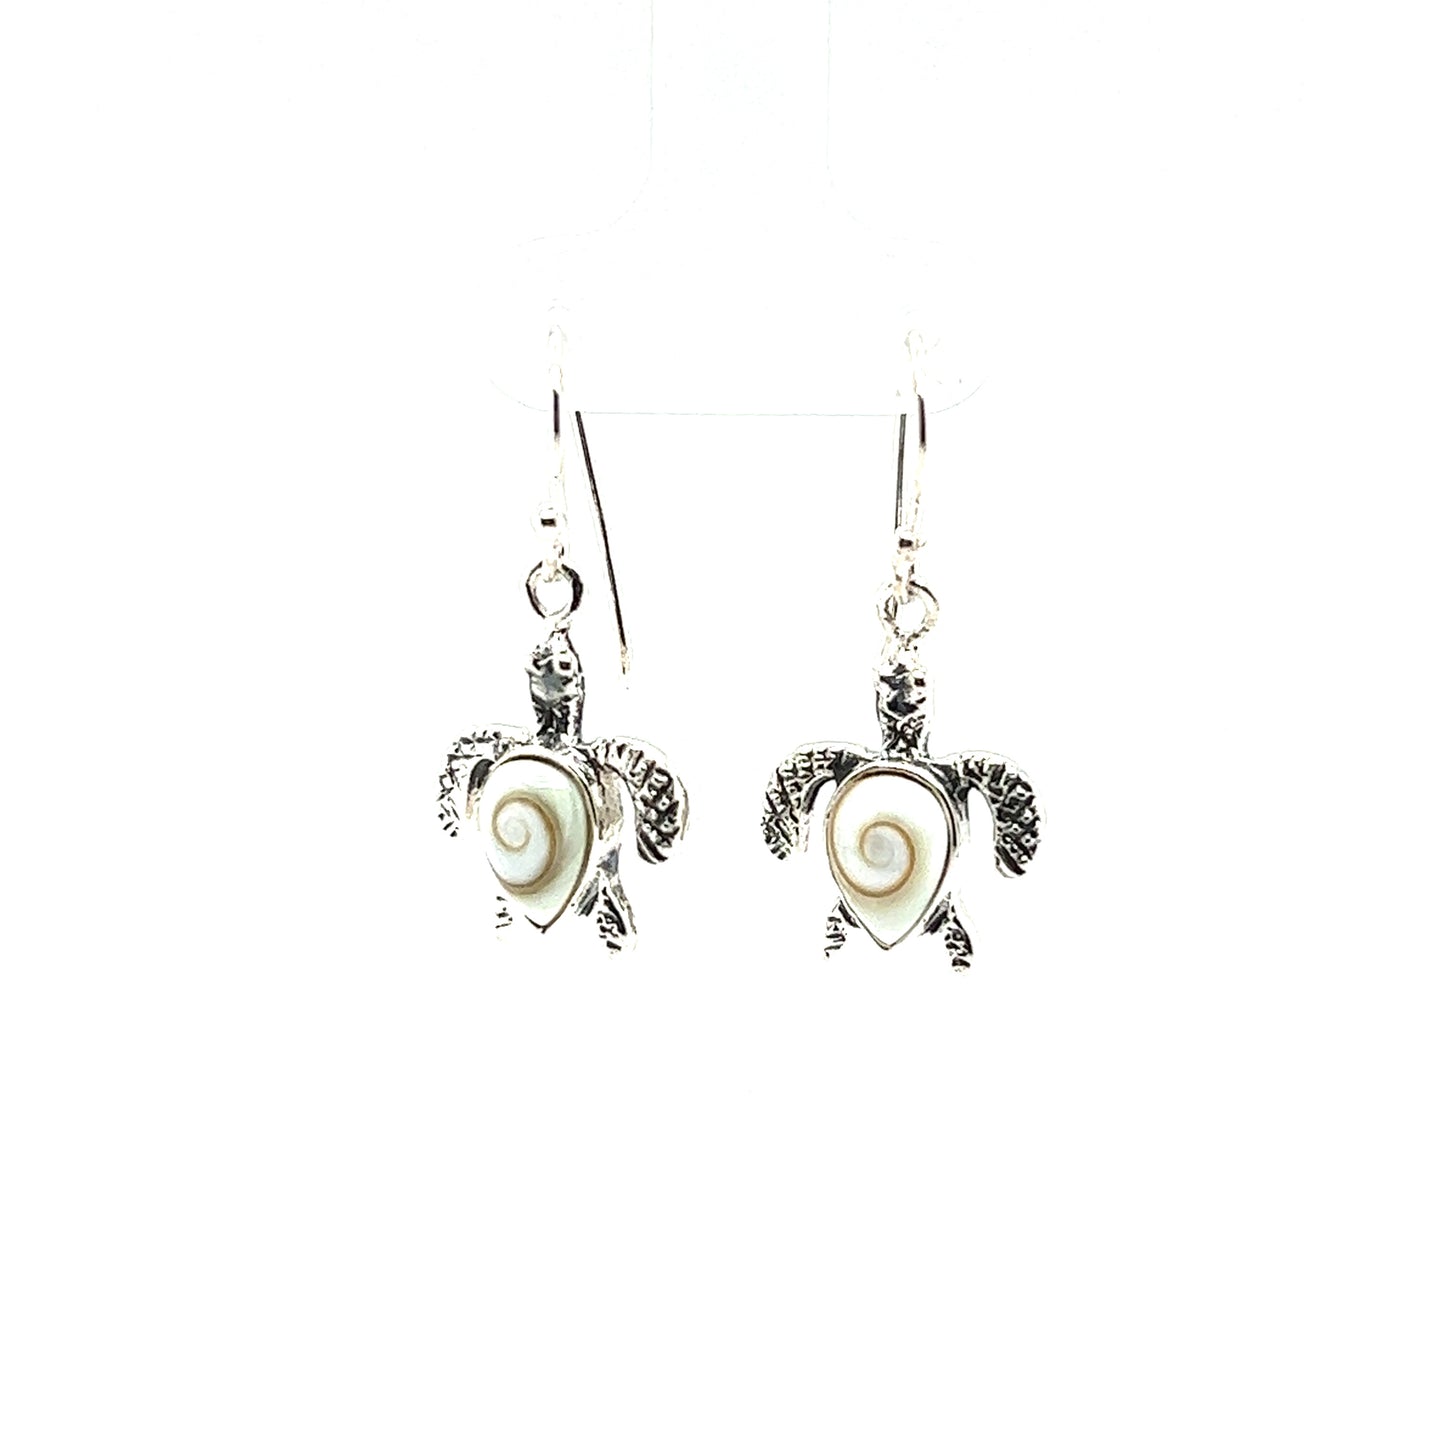 A pair of Super Silver Sea Turtle earrings with Shiva Shell adornments.